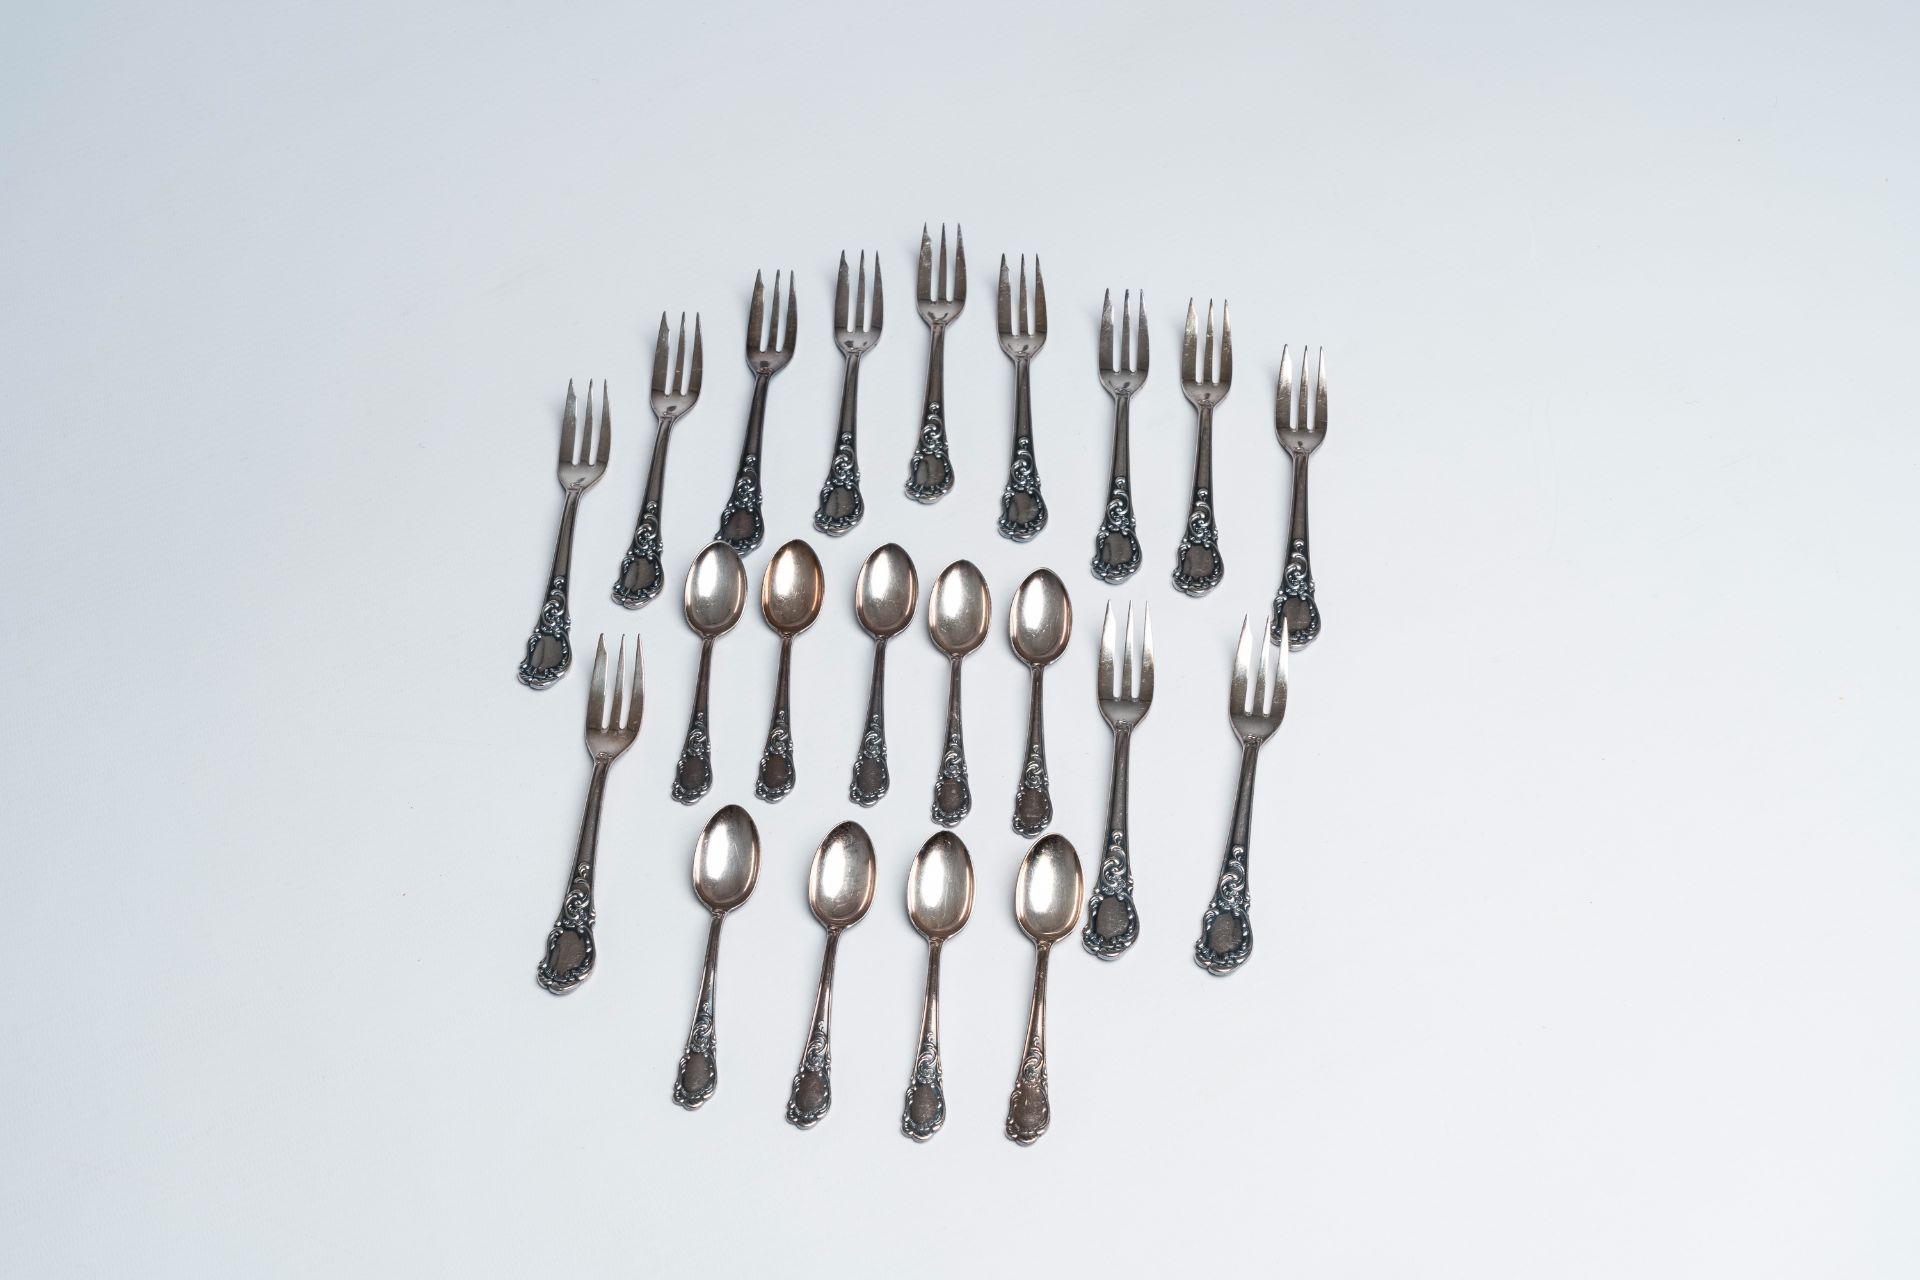 A 103-piece silver plated rococo style cutlery set with matching box, Picard & Wielputz, Germany, 20 - Image 8 of 12